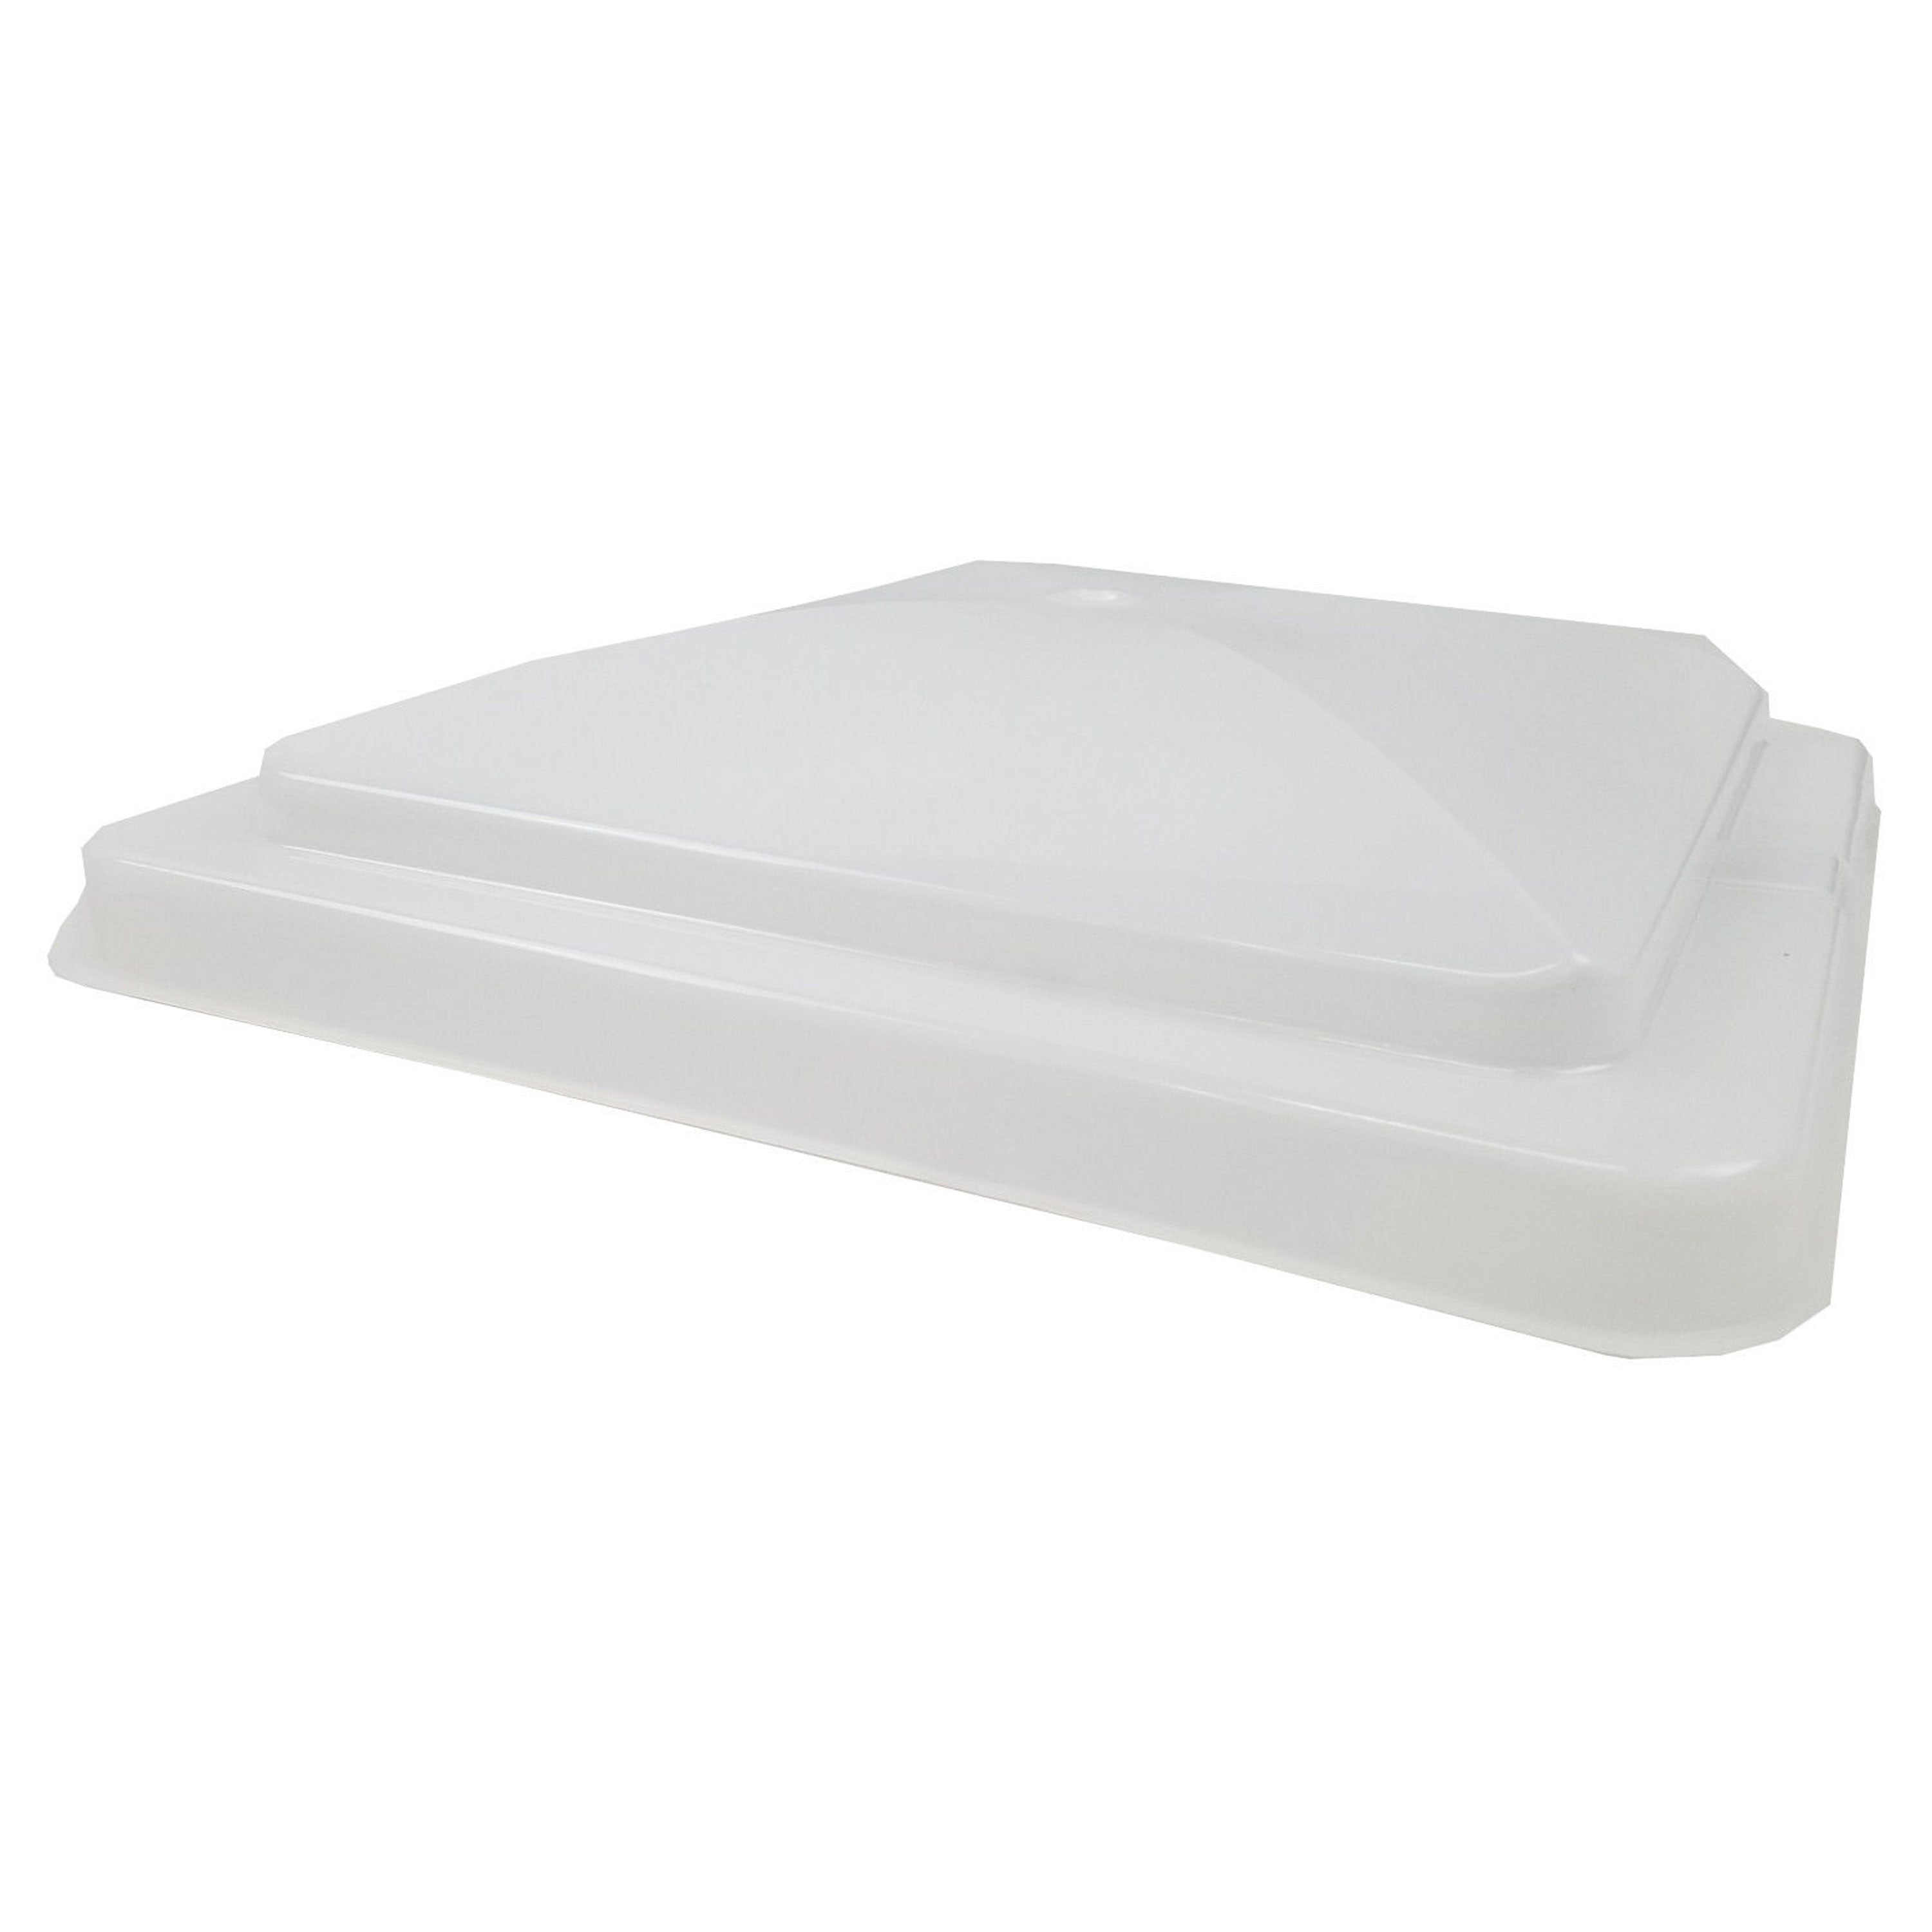 Heng's SV9007-C1 Zephyr Roof Vent Replacement Parts - 14" White Cover Only